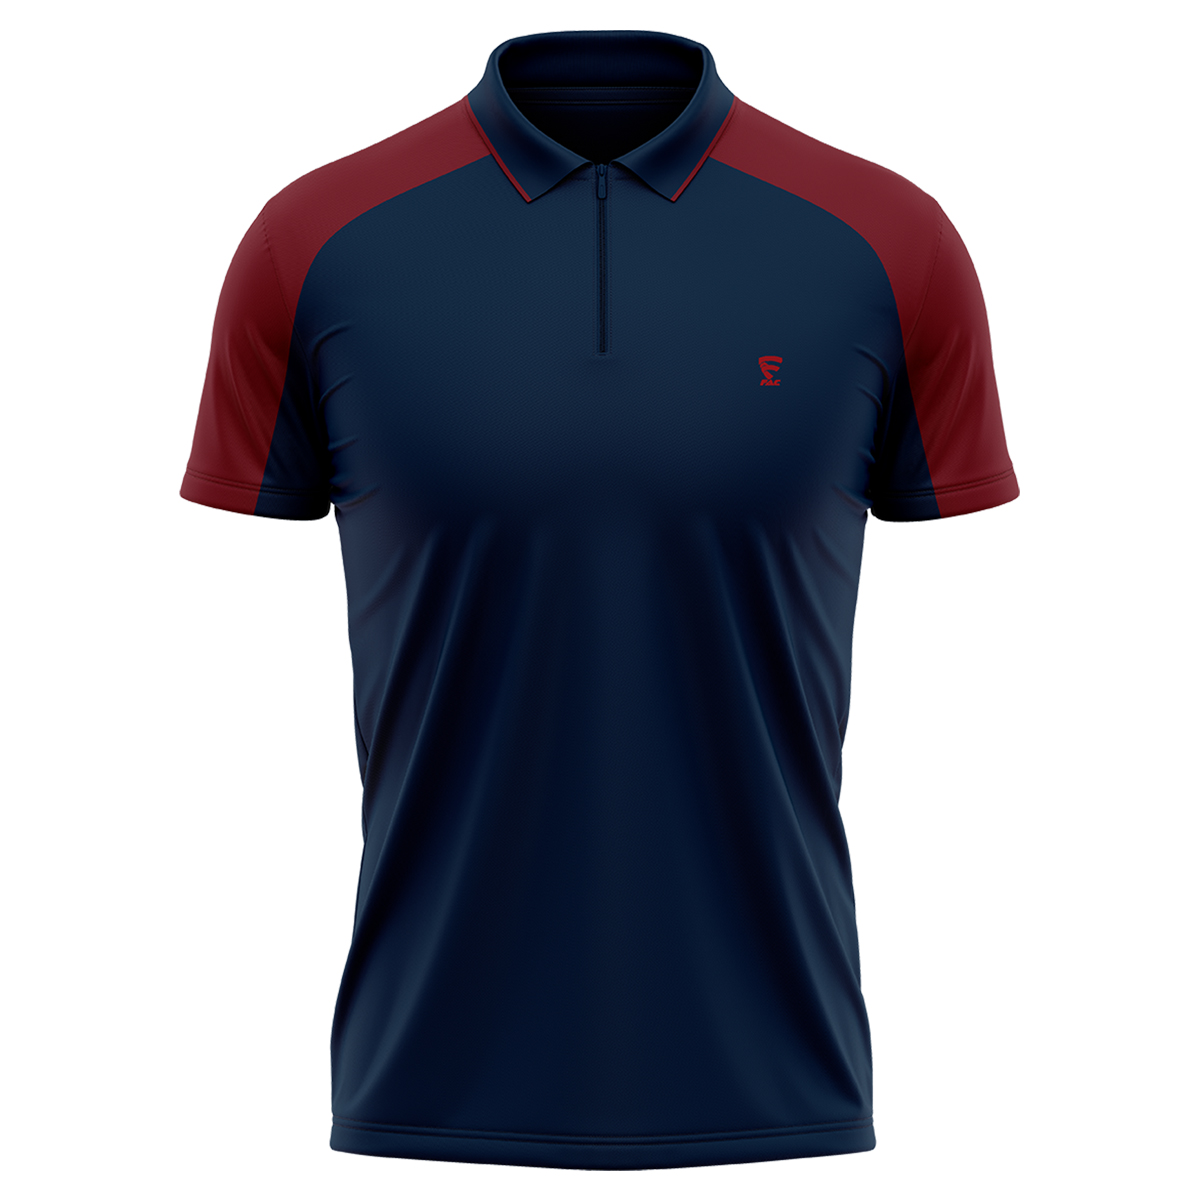 Table Tennis Polo Shirt’s – First American Corporation (Pvt) Ltd